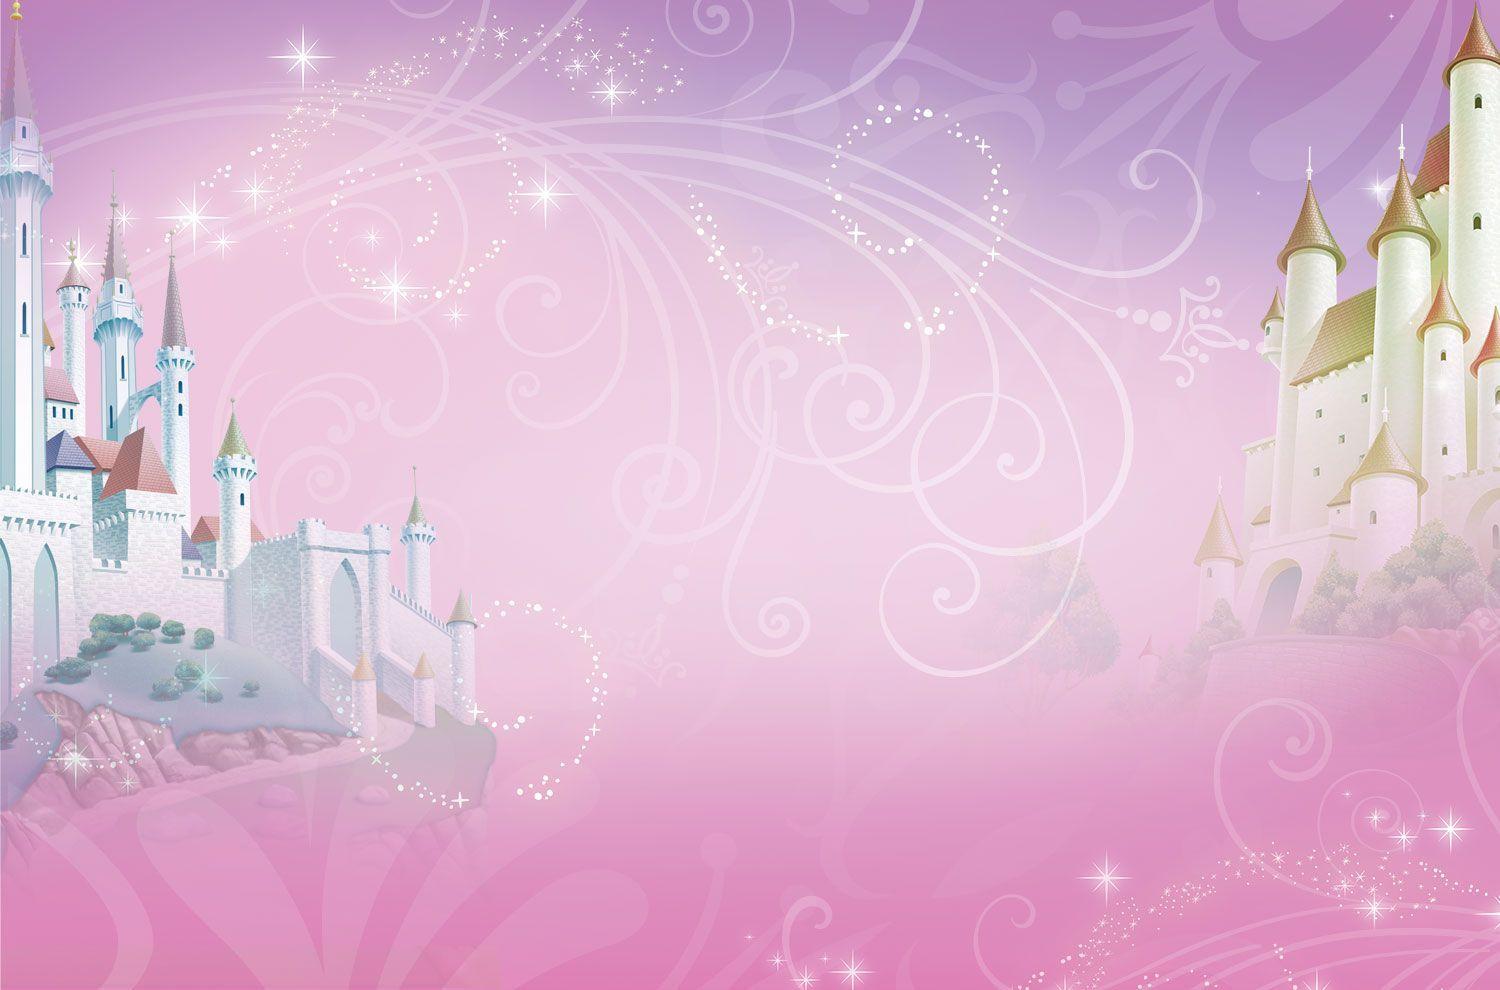 disney princess background image Image Search Results